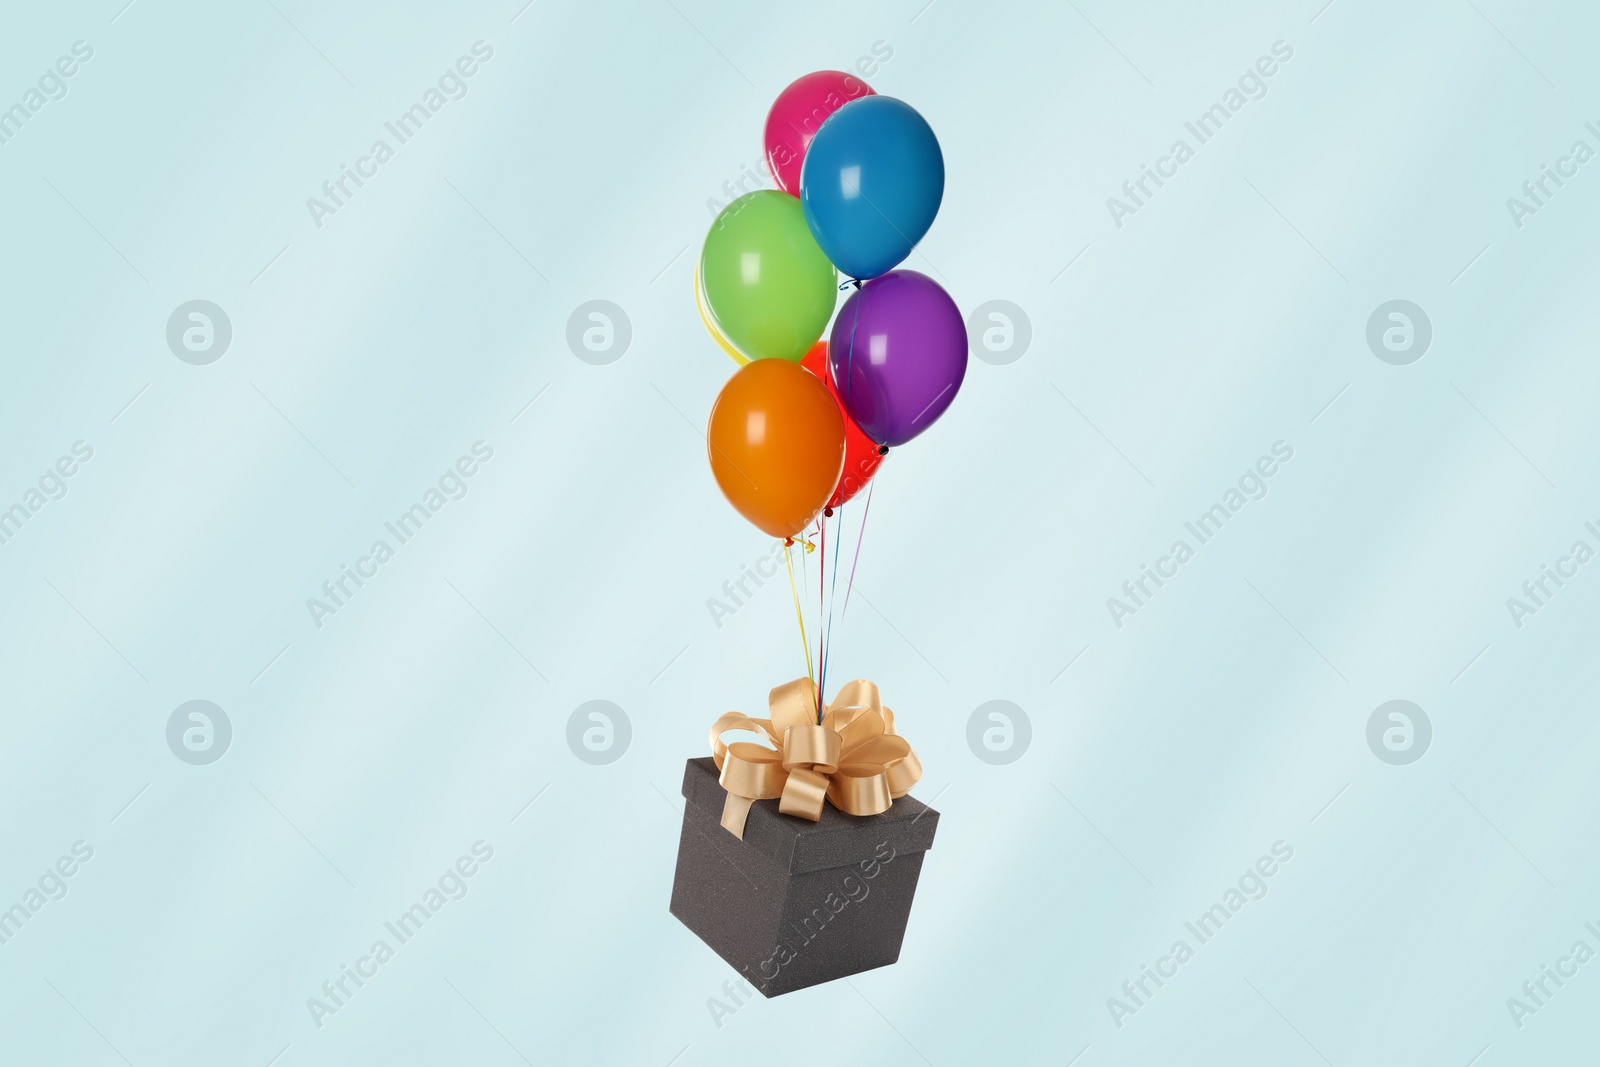 Image of Many balloons tied to gift box on light blue background